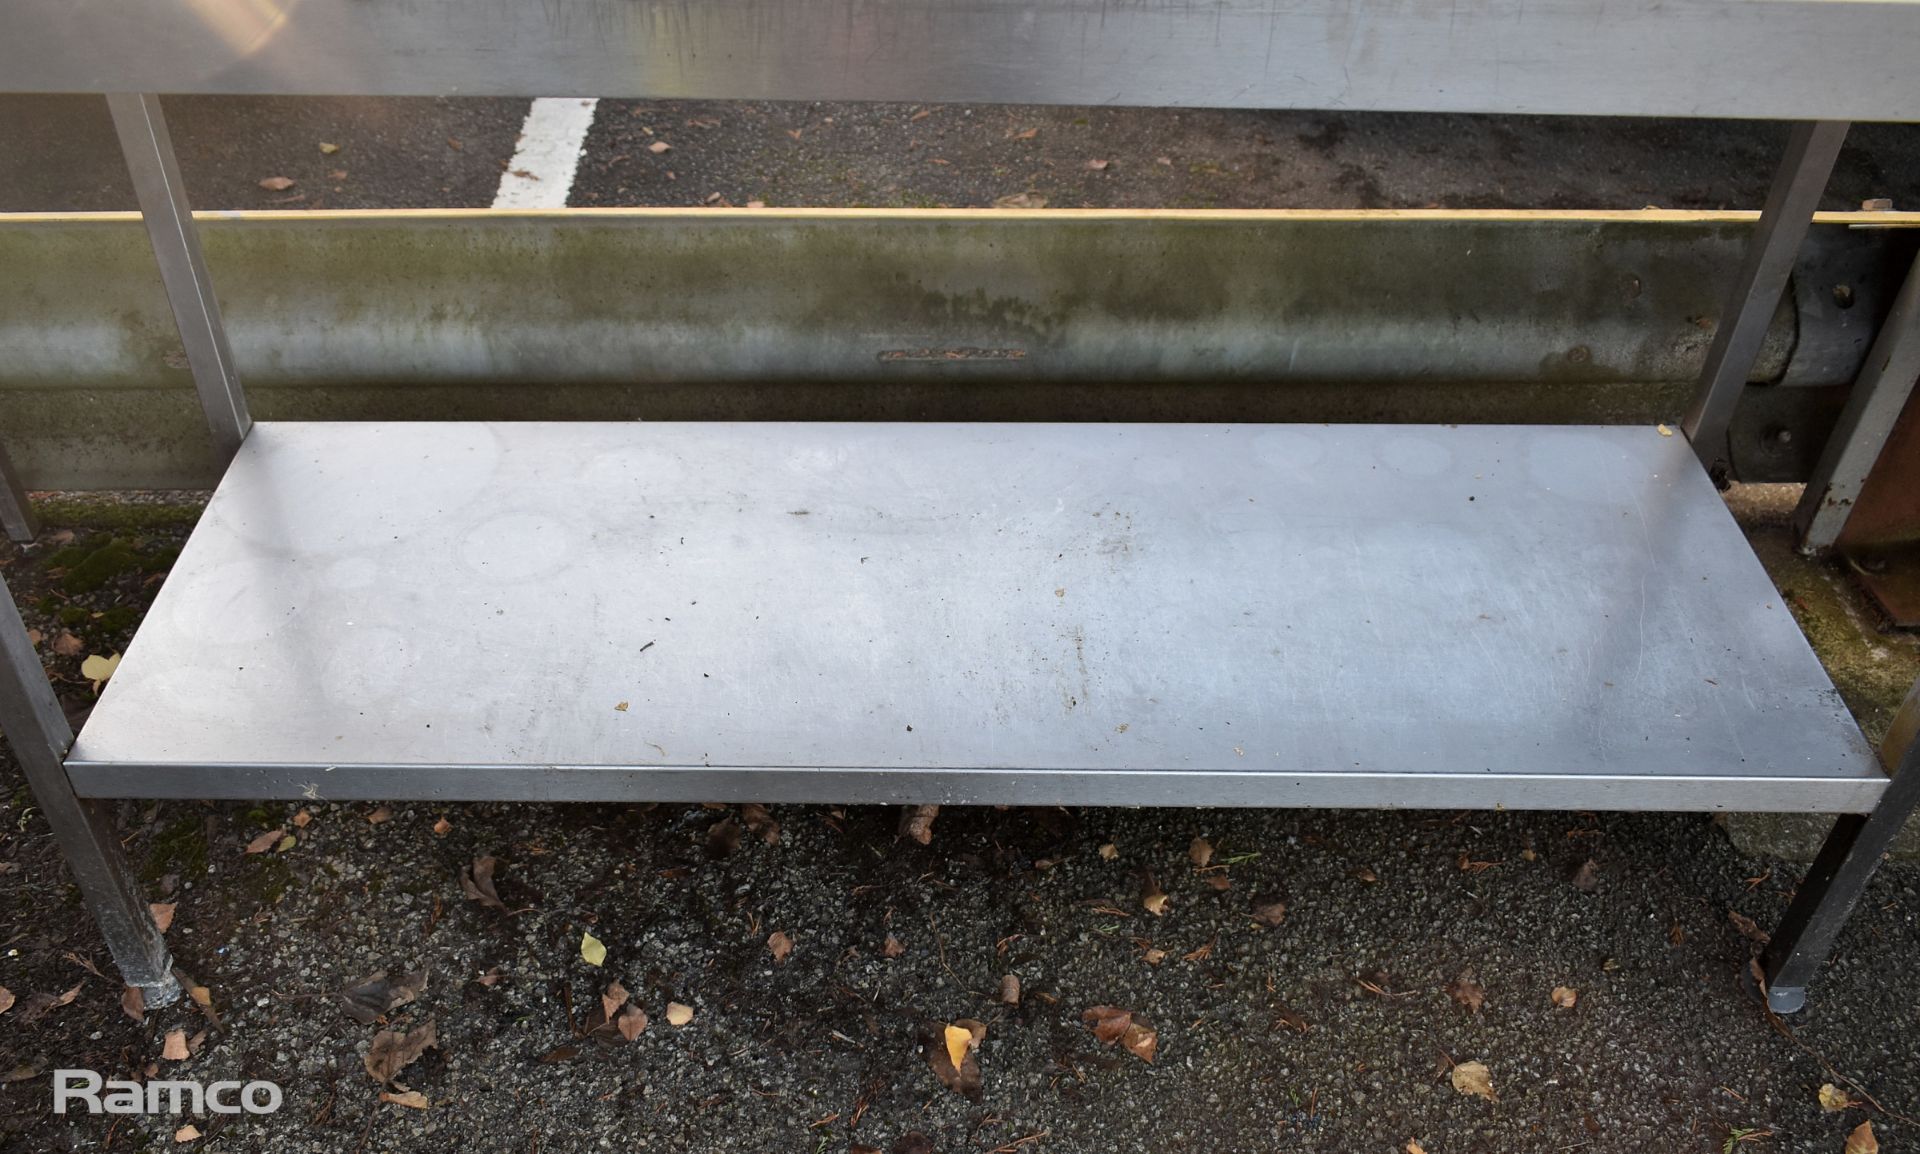 Stainless steel preparation table - L 1800 x W 650 x H 860mm - Image 3 of 3